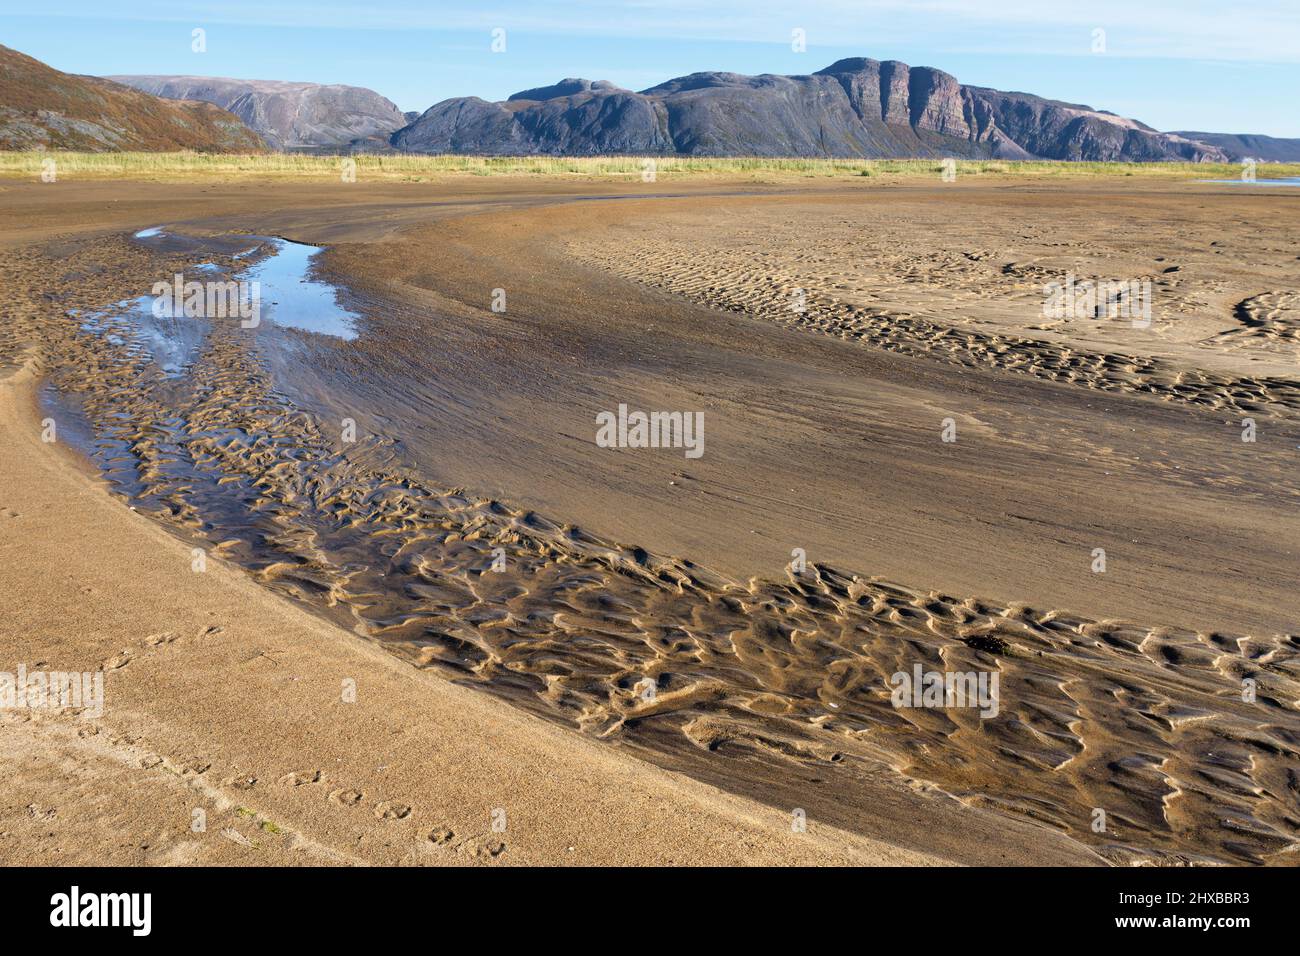 Landscape at low tide, sandy estuary and mountains, Tanamunningen nature reserve in the mouth of the Teno aka Tana river, Finnmark, Norway Stock Photo